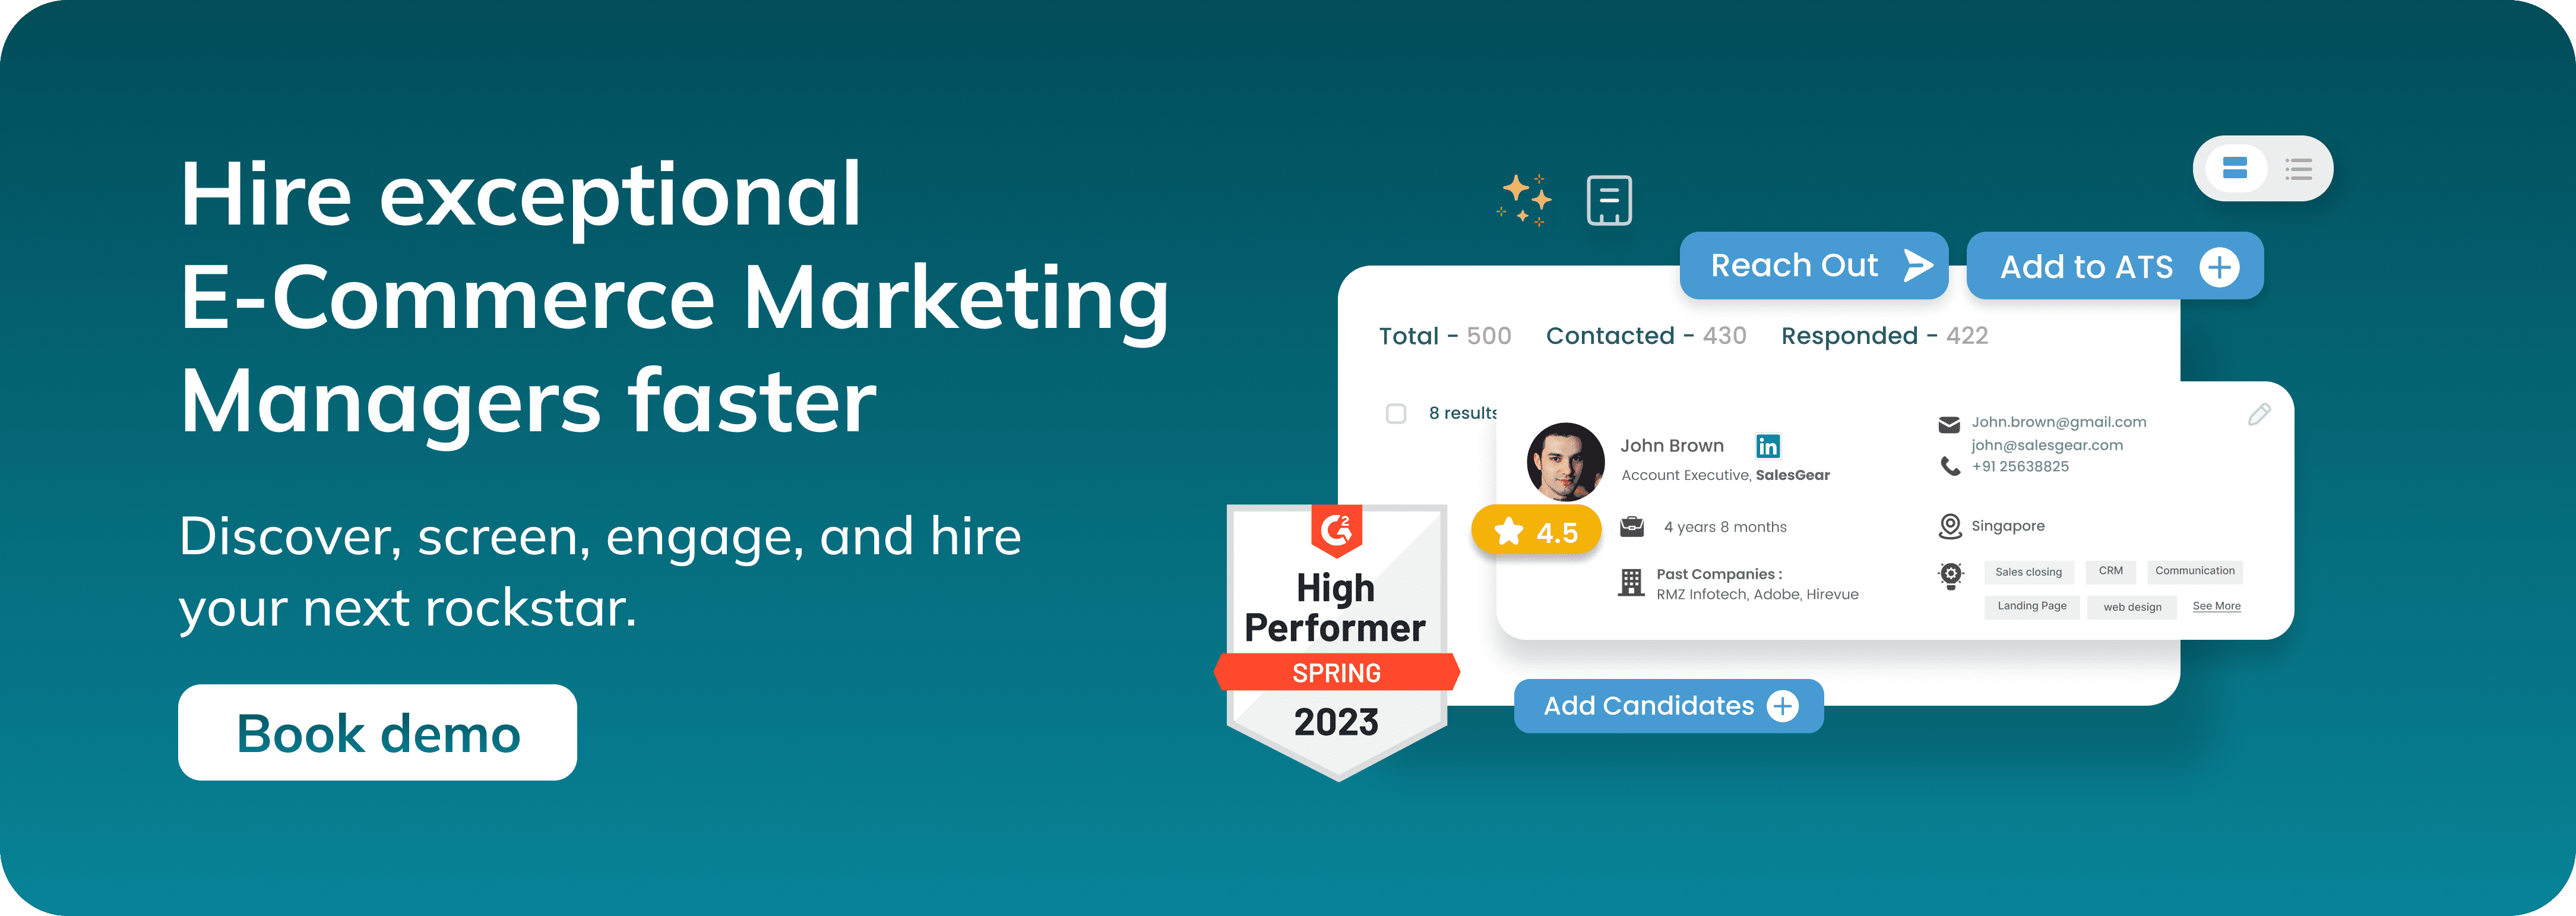 How to hire the perfect E-Commerce Marketing Manager.png